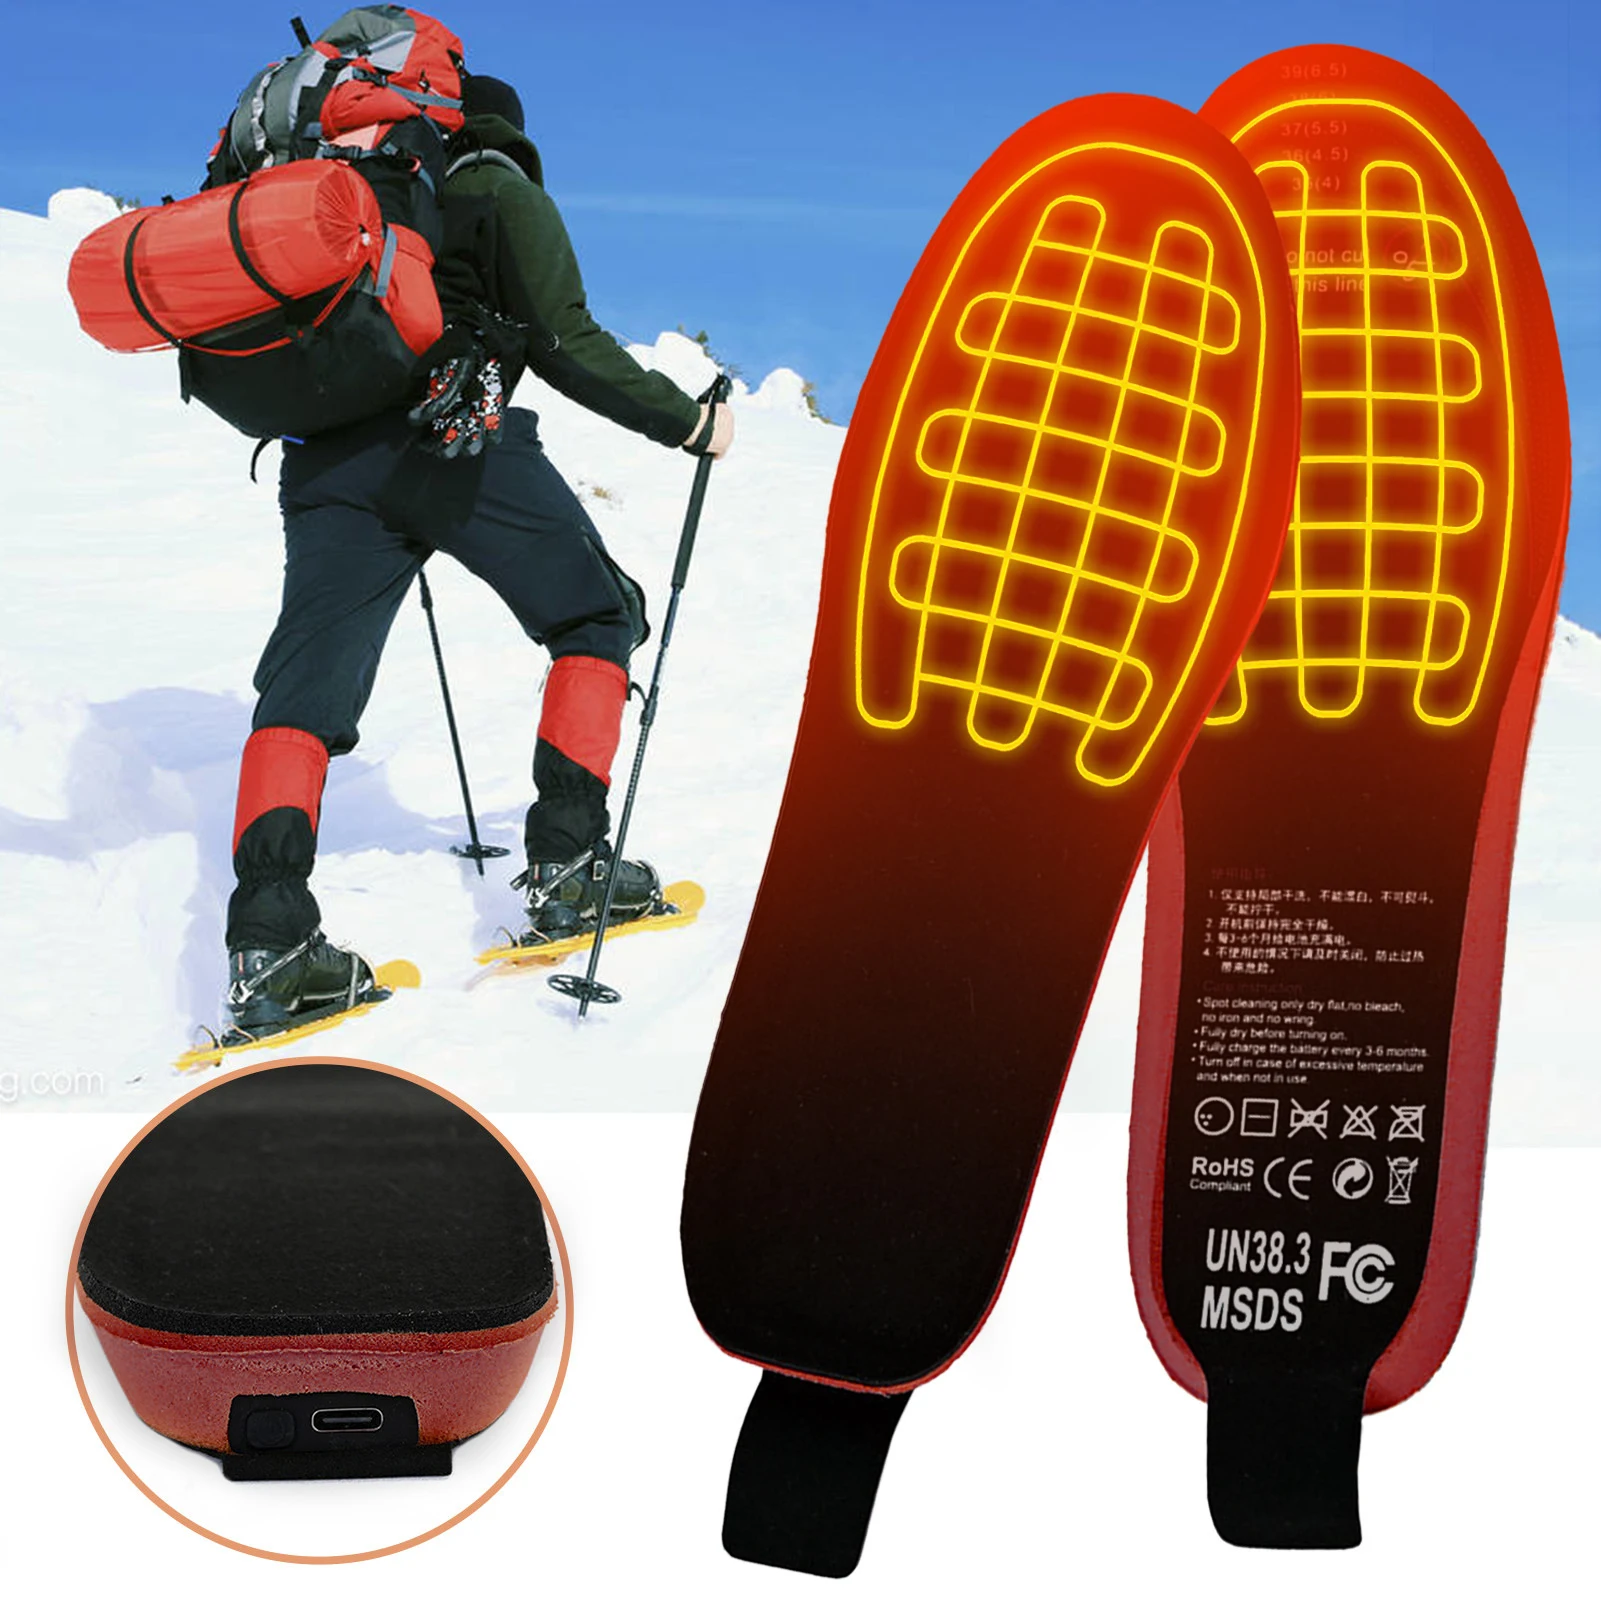 New 35-46 Size 2100mAh Heating Insoles with LED Remote Control Men Women Sport EVA Shoes Pads Outdoor Skiing Heated Insoles 3.7V 5